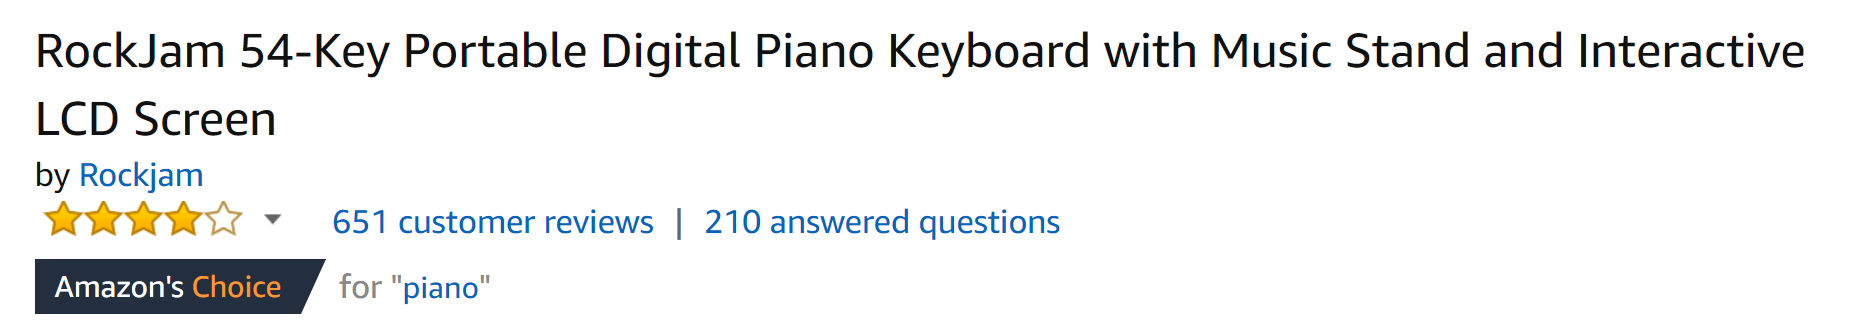 Keyboard with lots of reviews